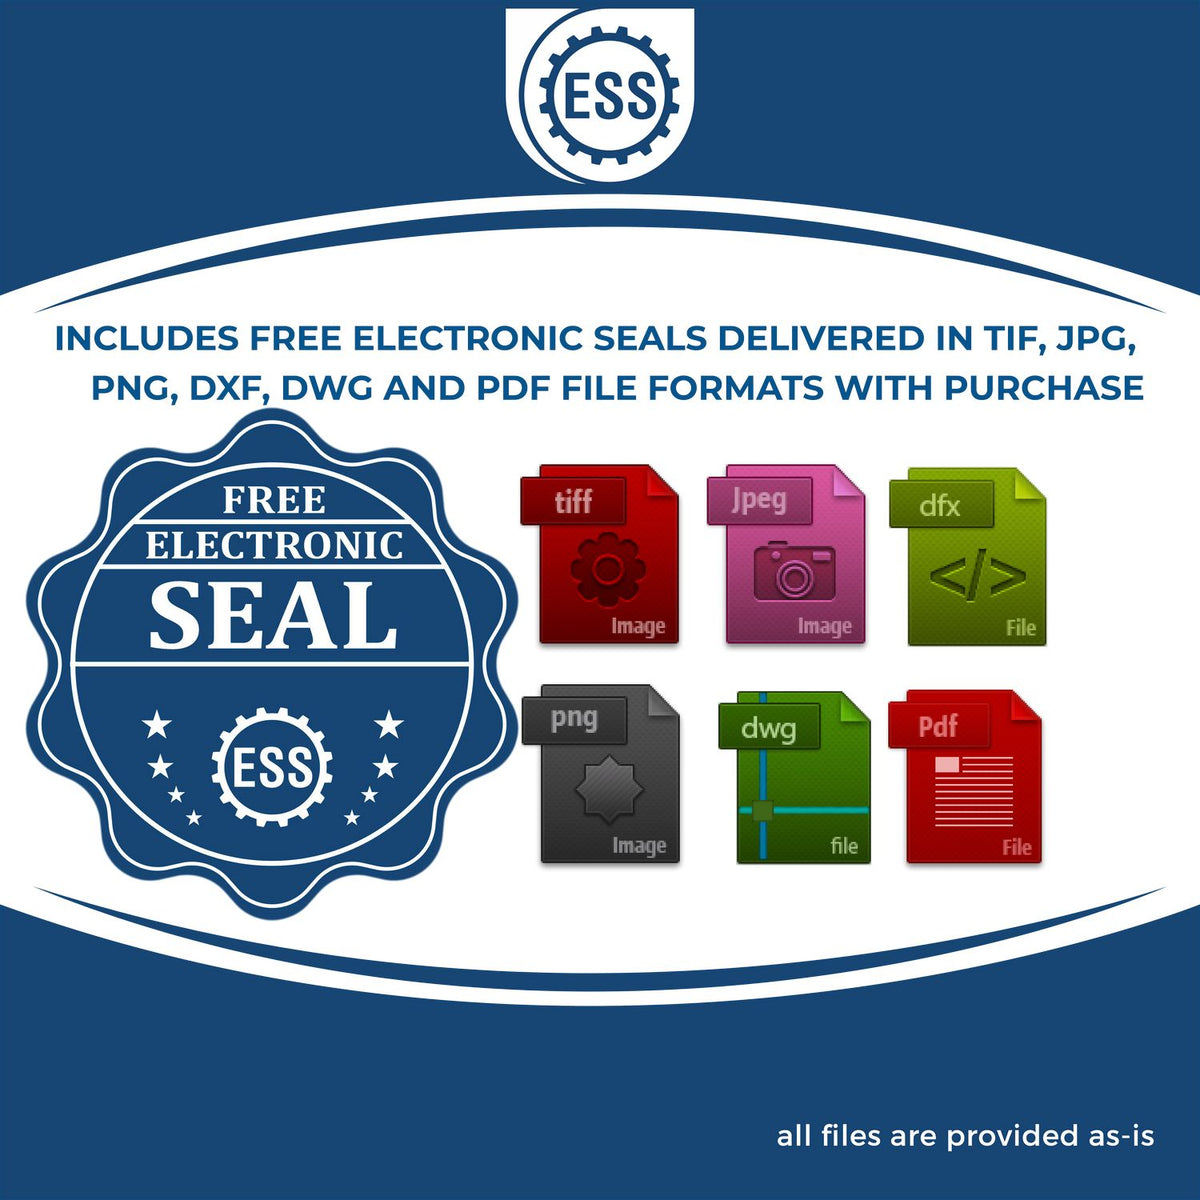 An infographic for the free electronic seal for the Gift Georgia Engineer Seal illustrating the different file type icons such as DXF, DWG, TIF, JPG and PNG.